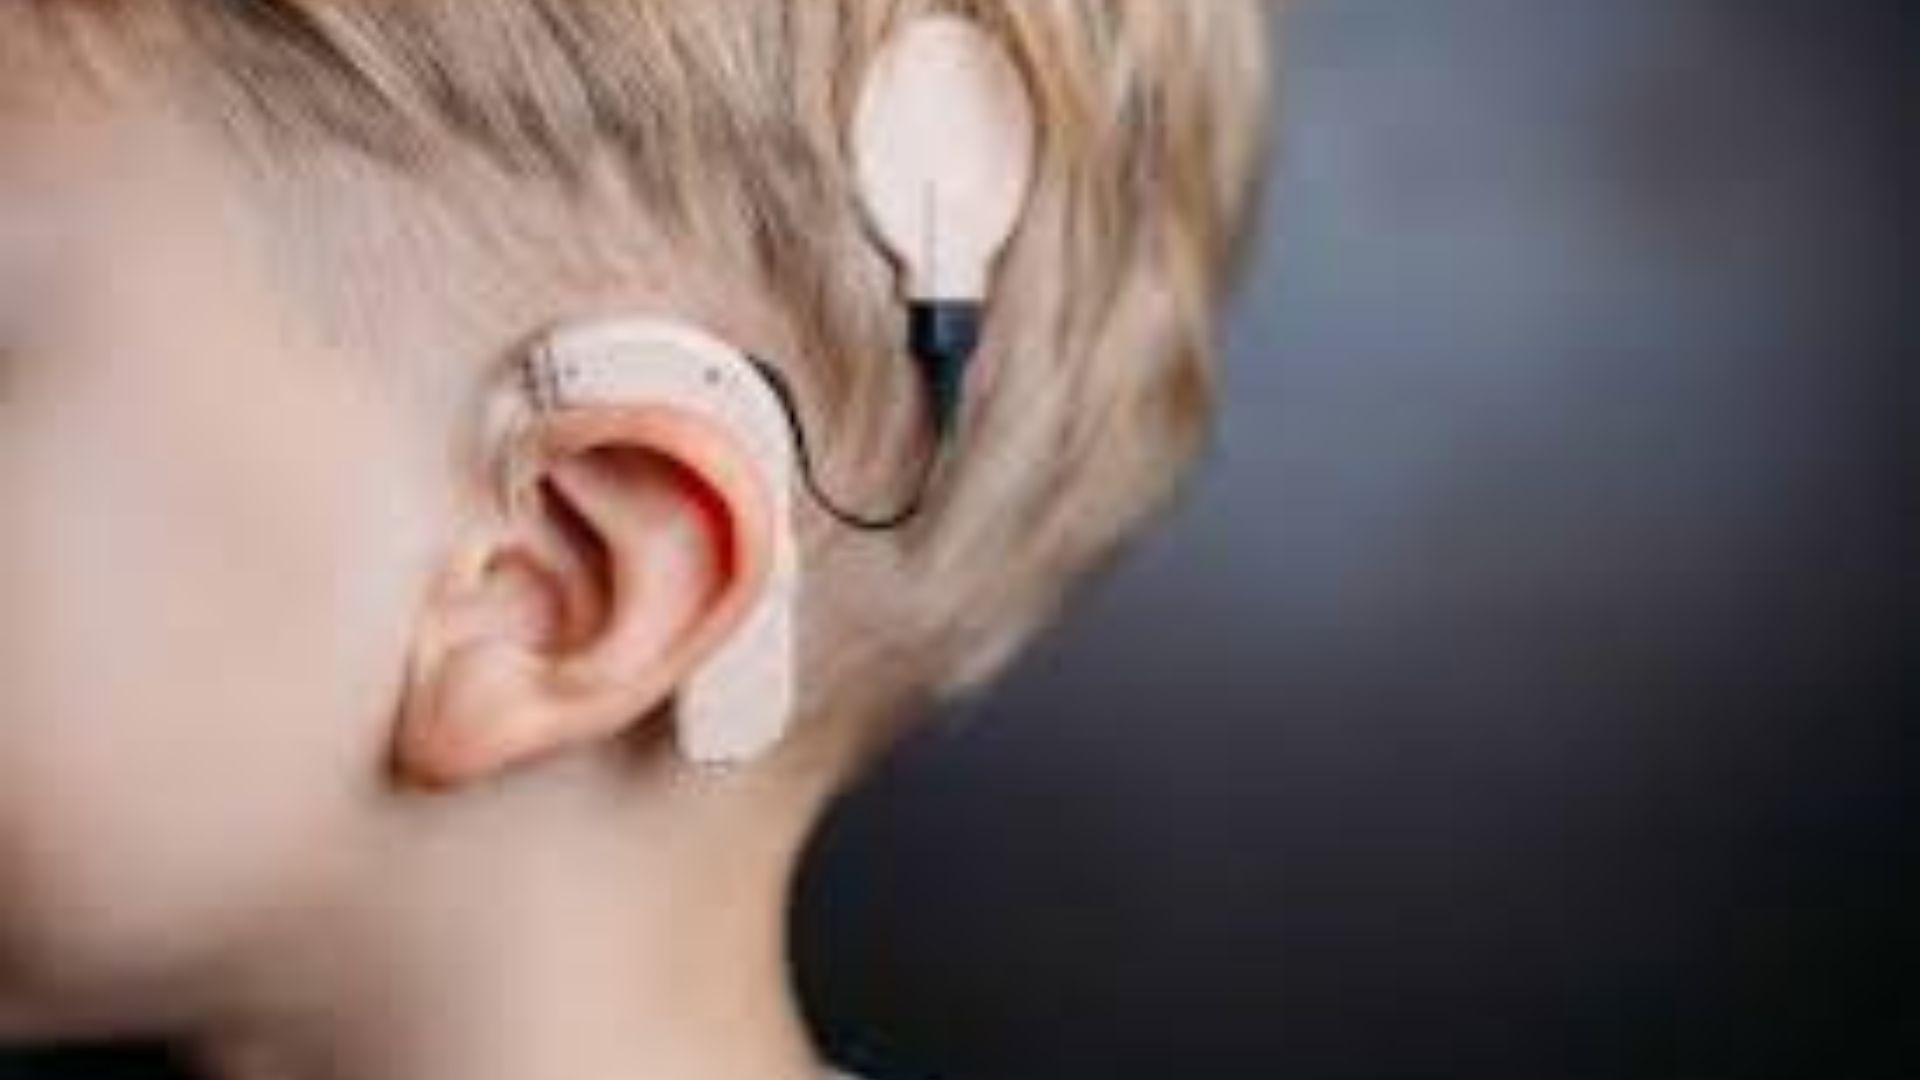 India’s 2nd youngest gets Cochlear implant